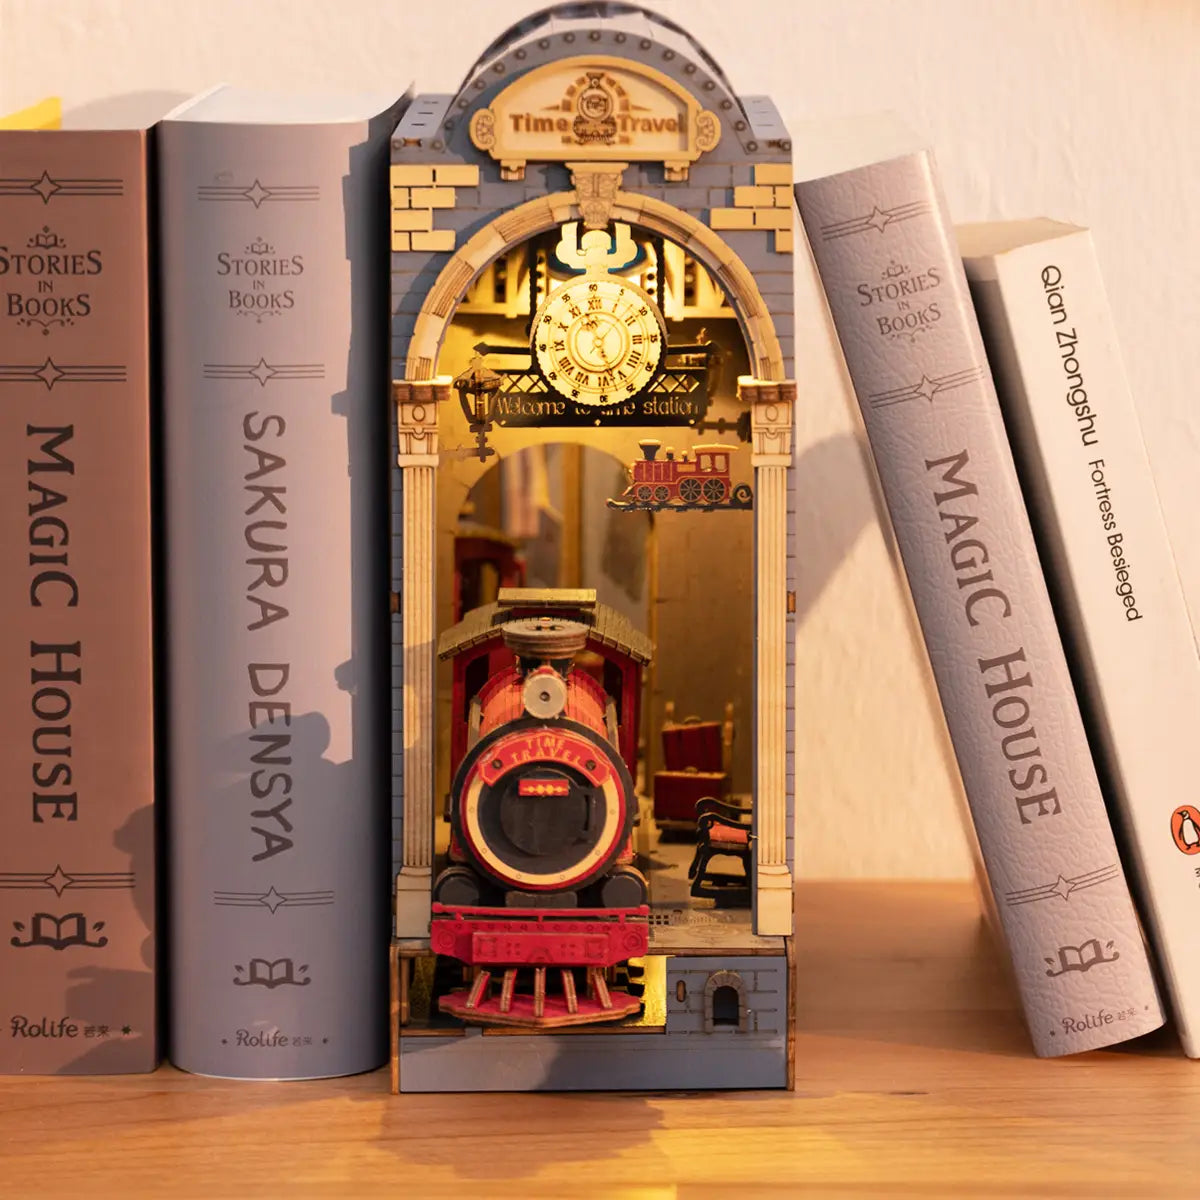 Book Nook Kits For Adults - Time Travel